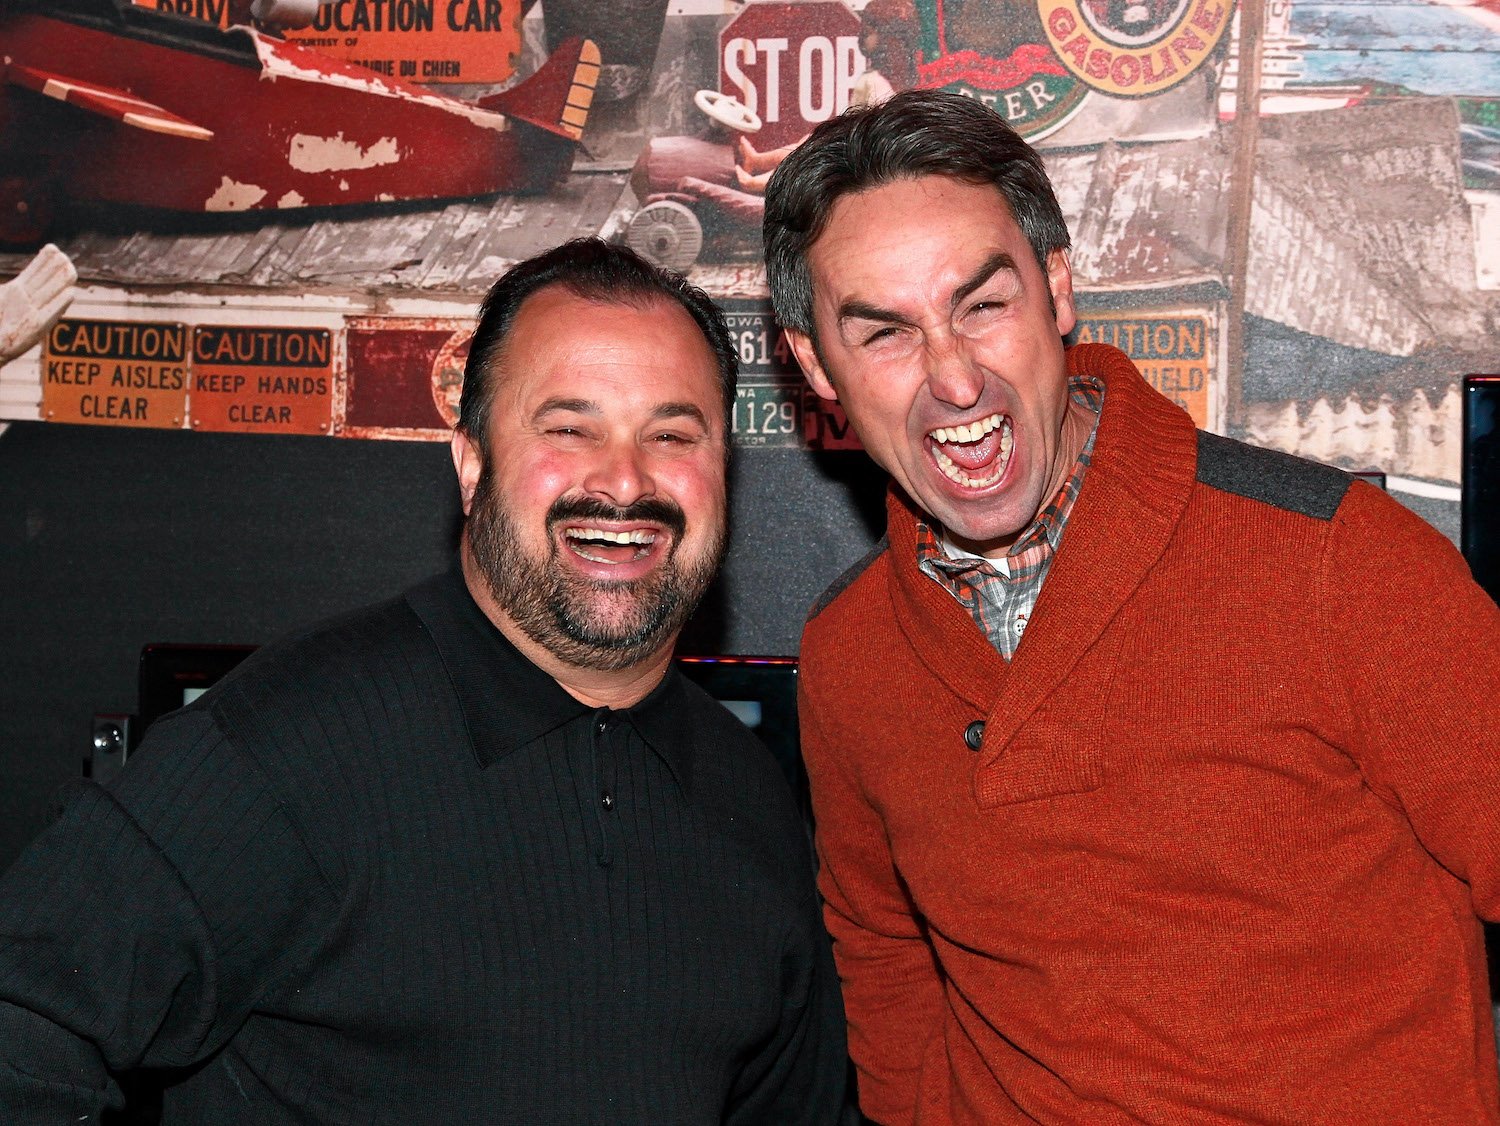 Frank Fritz and Mike Wolfe from 'American Pickers' standing next to each other and smiling excitedly